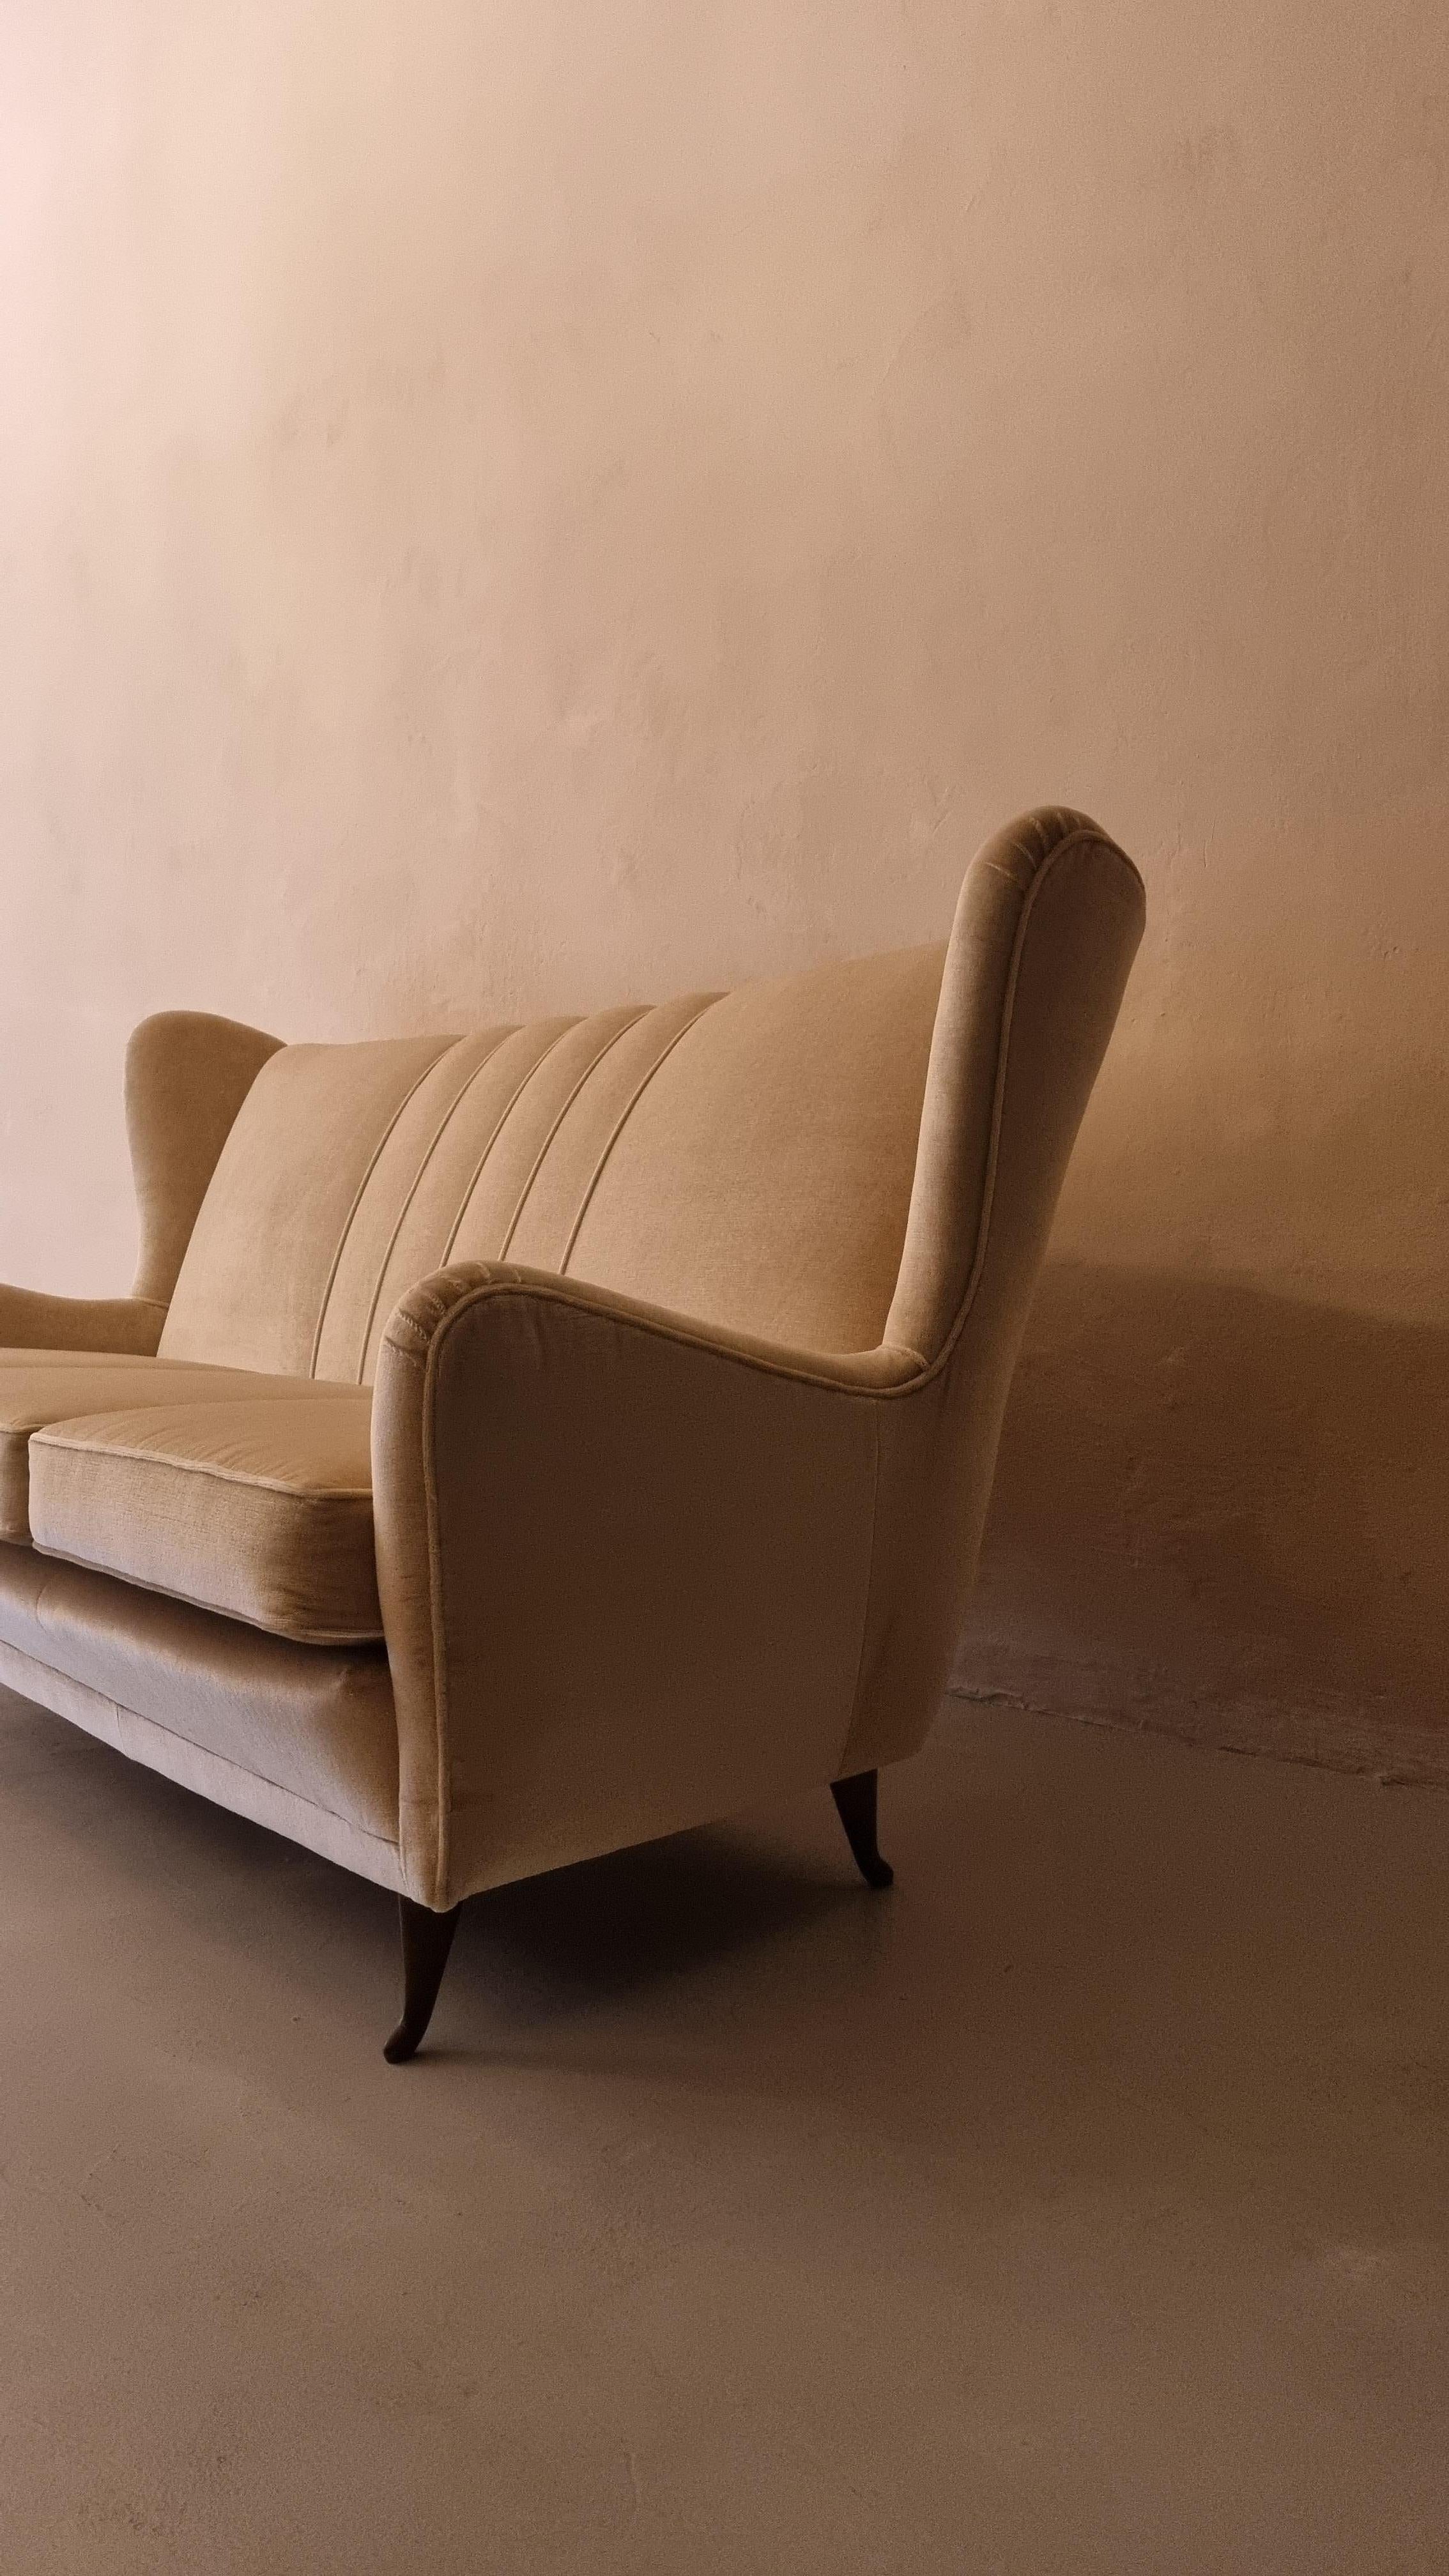 Sofa 3 seats velvet production Isa Begamo, 1950, restored in beige velvet, brass feet.
Works by ISA Bergamo remain: mirrors, armchairs and many furnishing accessories that have conquered even a master like Giò Ponti.

Isa Bergamo, literally